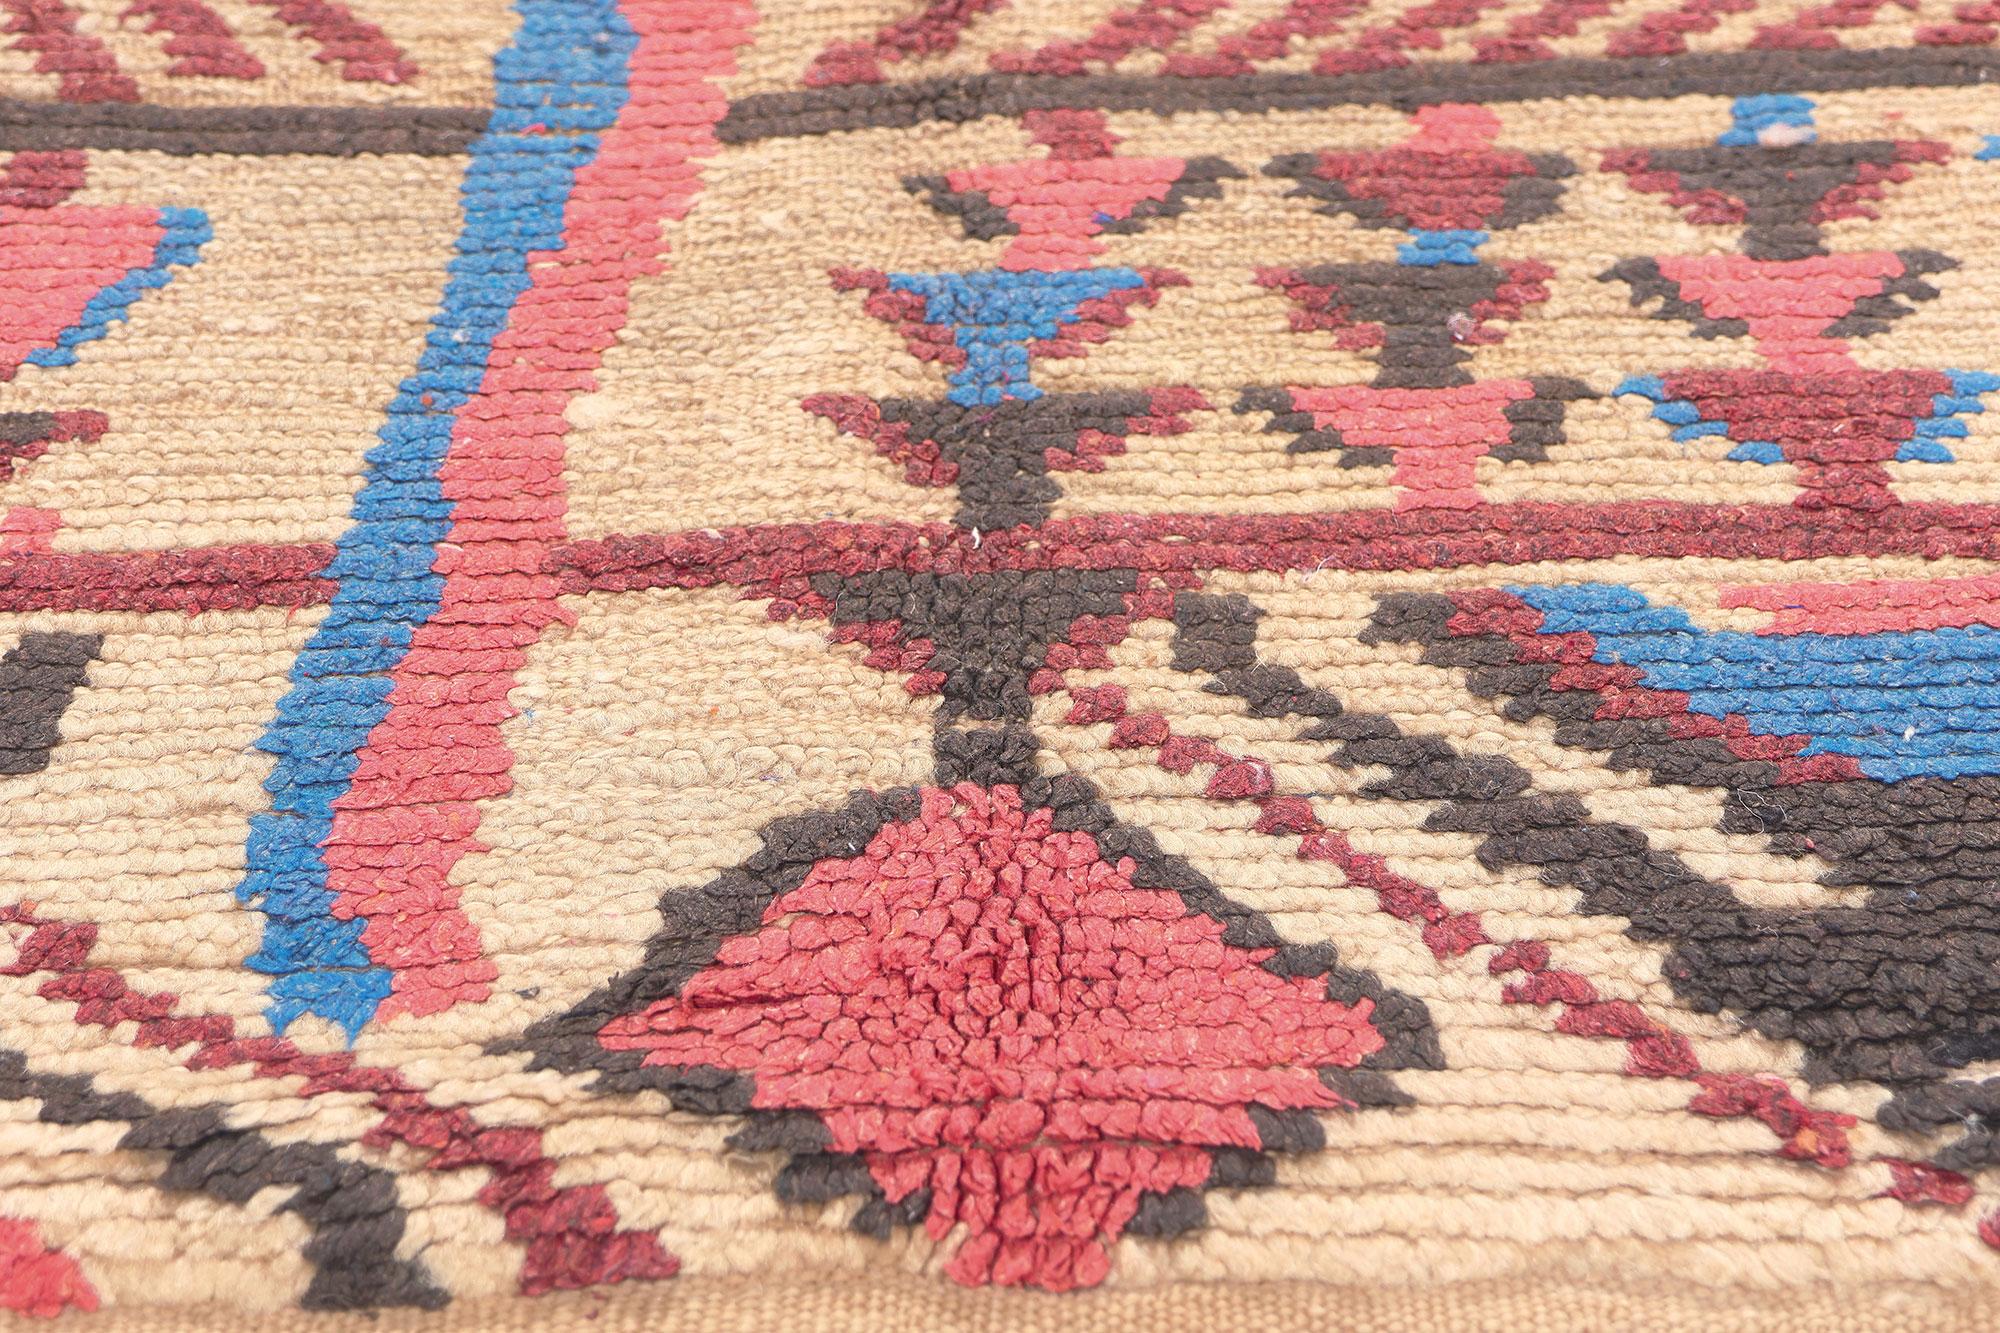 Vintage Moroccan Azilal Rug, Tribal Enchantment Meets Global Boho Chic In Good Condition For Sale In Dallas, TX